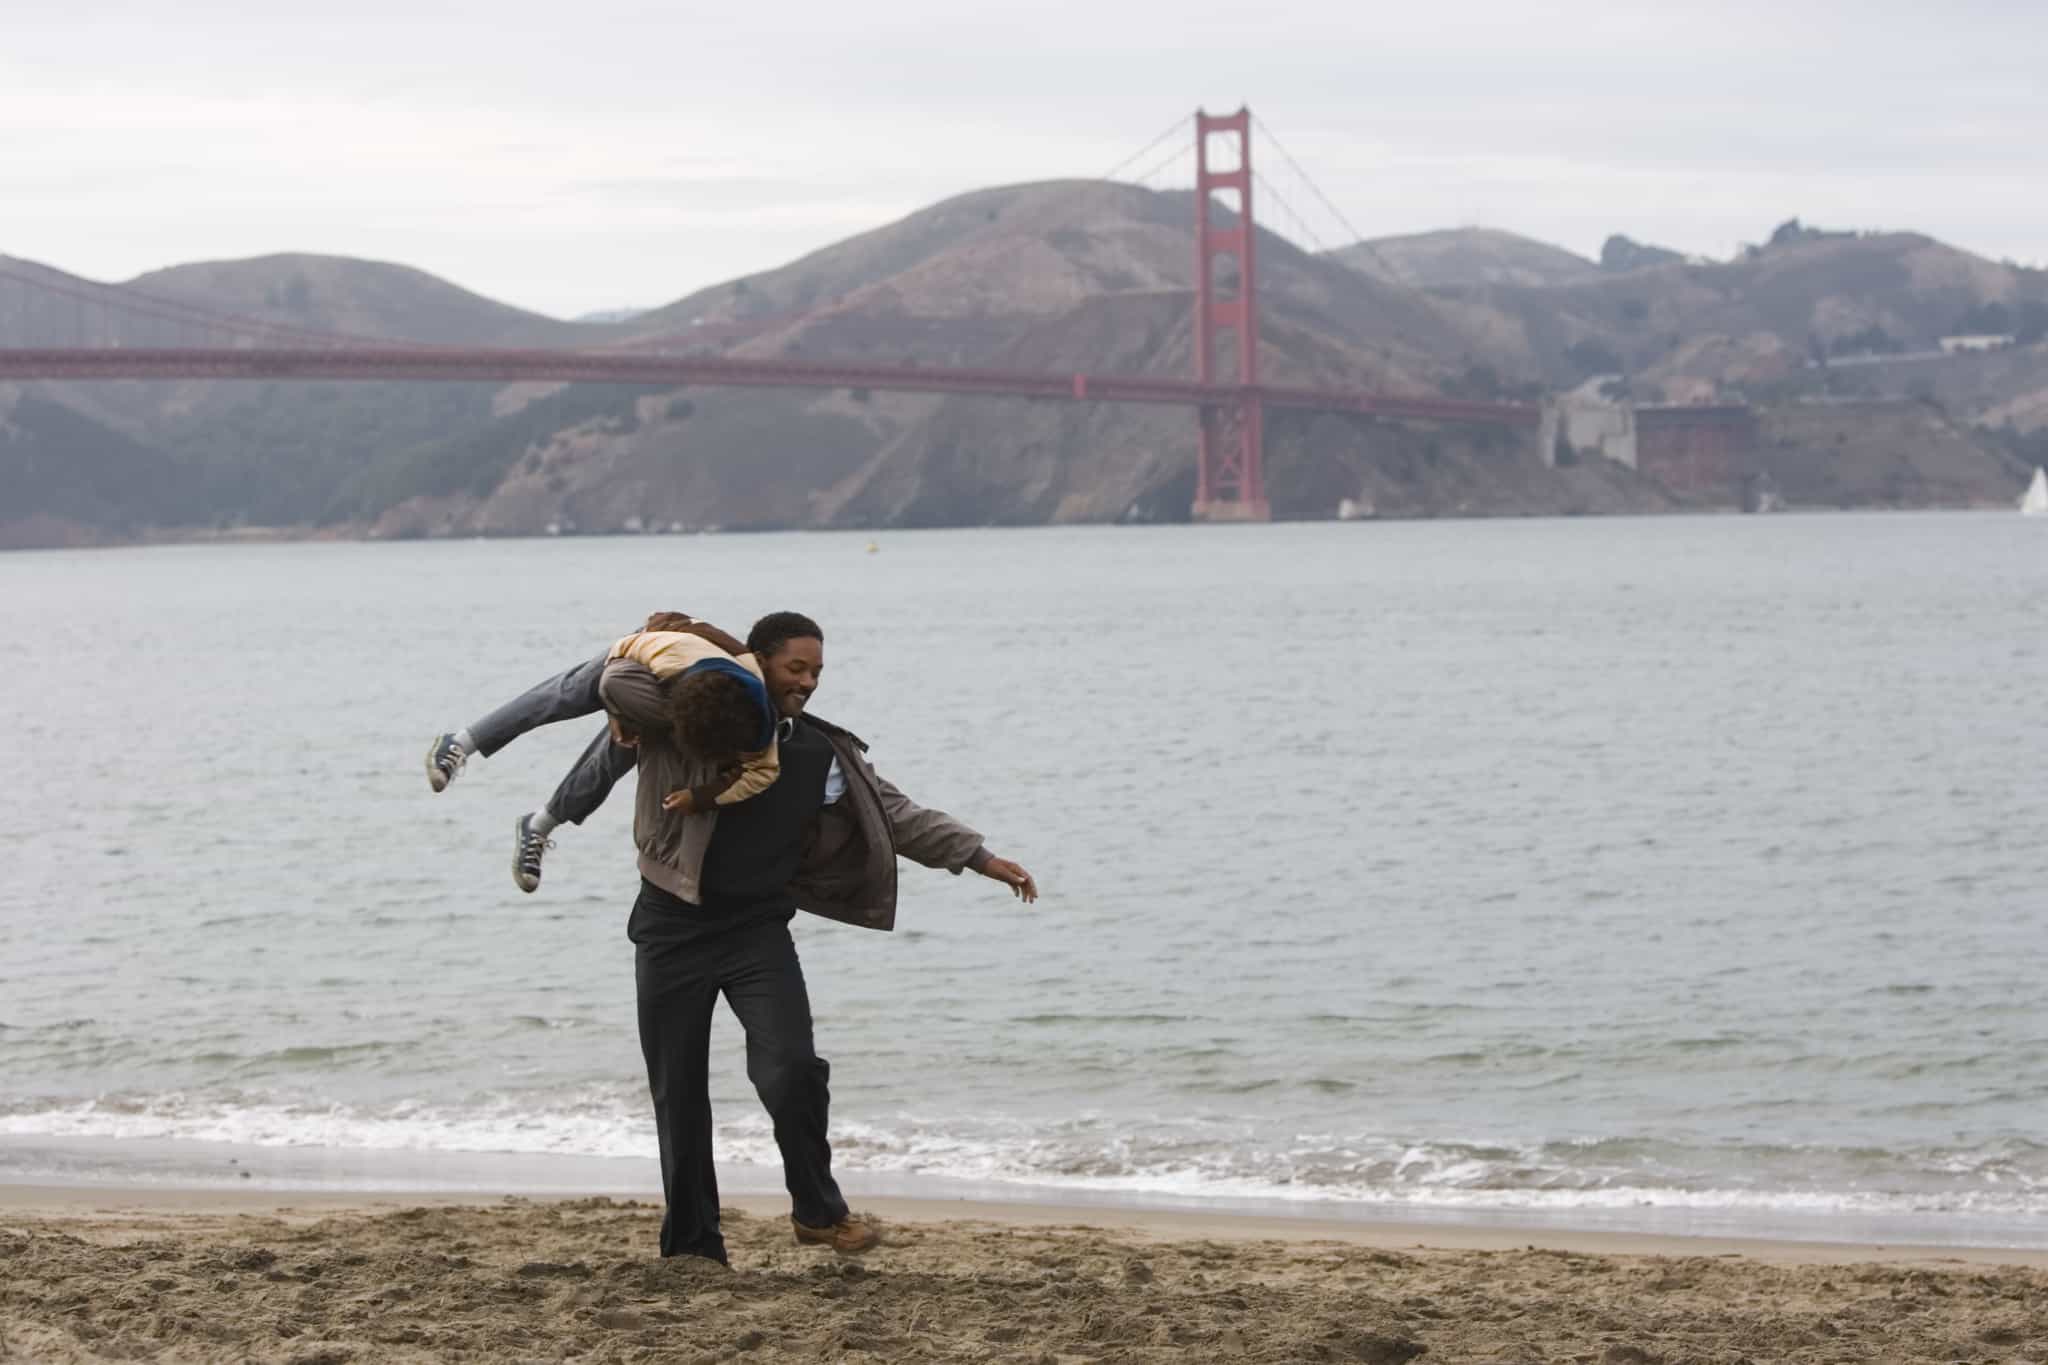 Chris playfully throws his son over his shoulder in front of the Golden Gate Bridge